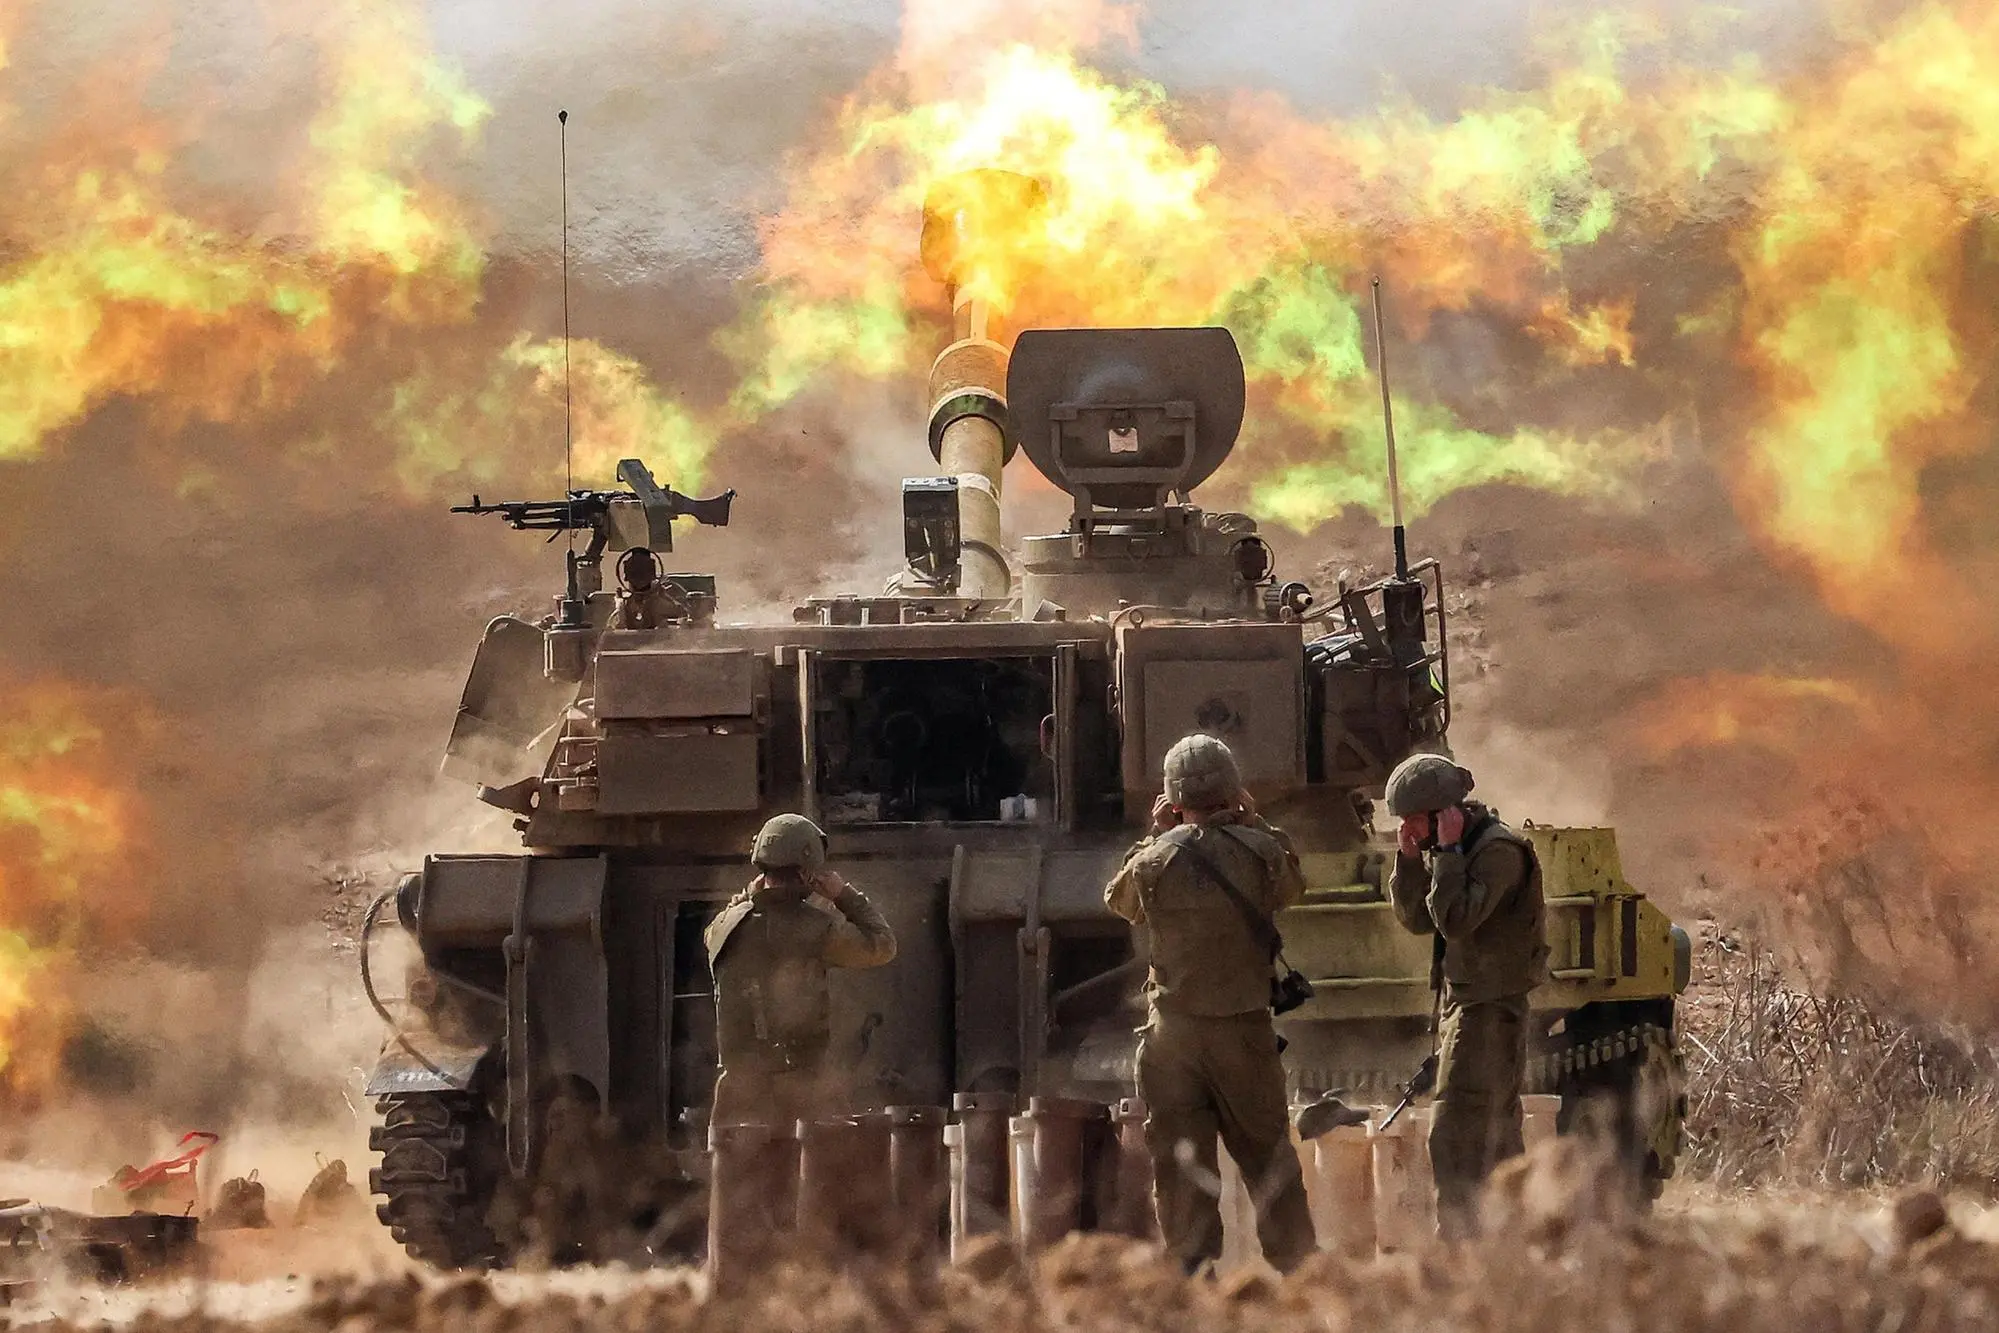 TOPSHOT - An Israeli army self-propelled howitzer fires rounds near the border with Gaza in southern Israel on October 11, 2023. Israel declared war on Hamas on October 8 following a shock land, air, and sea assault by the Gaza-based militant group. The death toll in Israel has surged above 1,200 following the worst attack in the country's 75-year history, while Gaza officials have reported 1000 people killed so far. (Photo by JACK GUEZ / AFP)